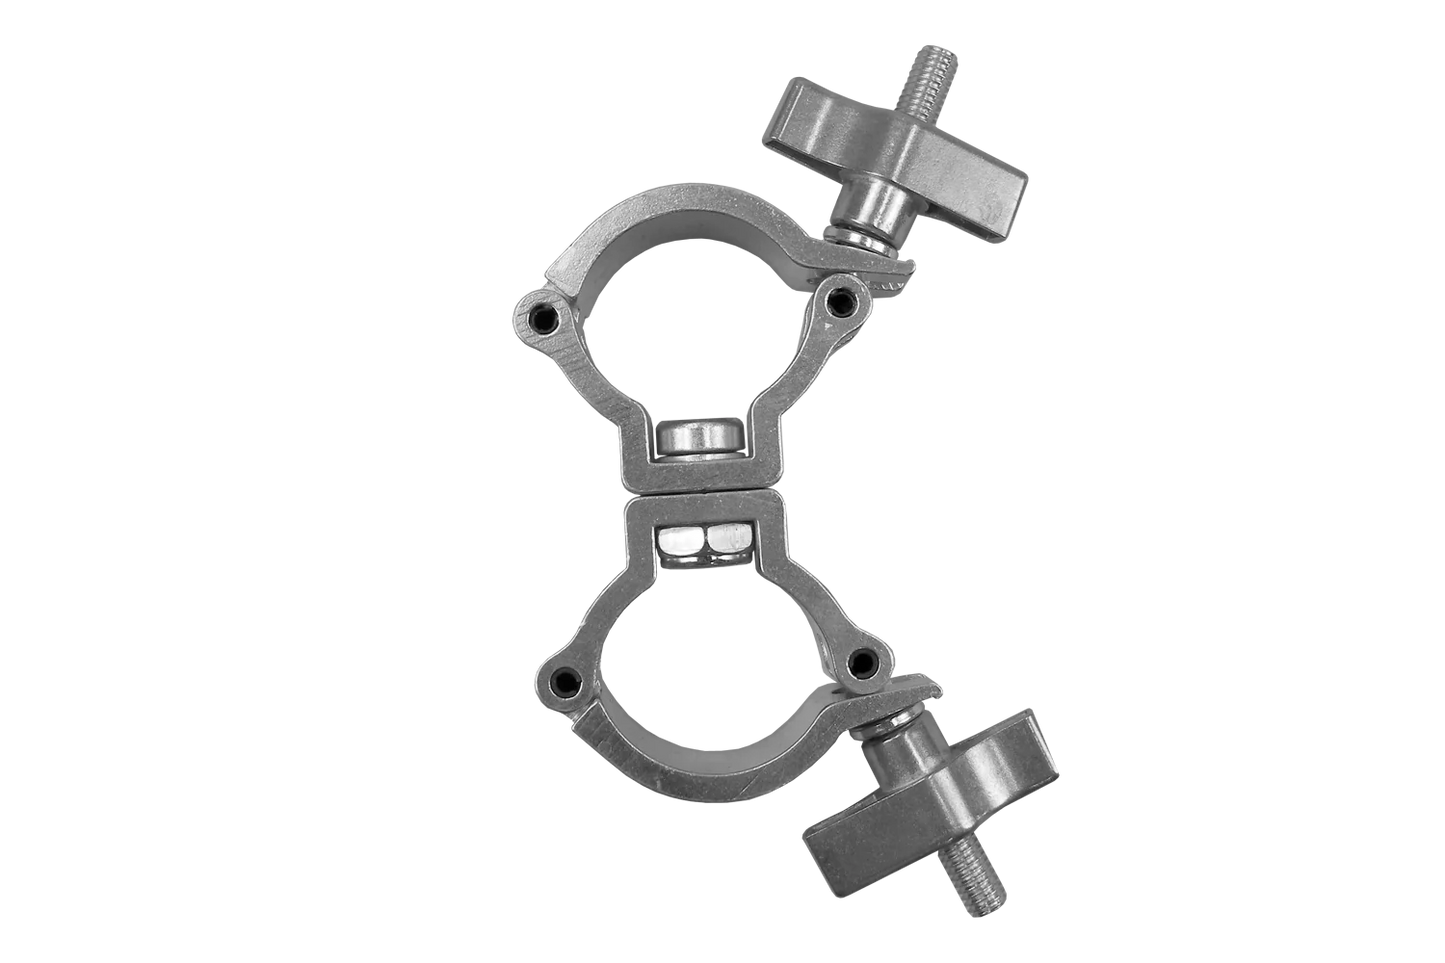 Event Lighting CLAMPDP38S - Aluminium Double Swivel Pipe Clamp (Silver)